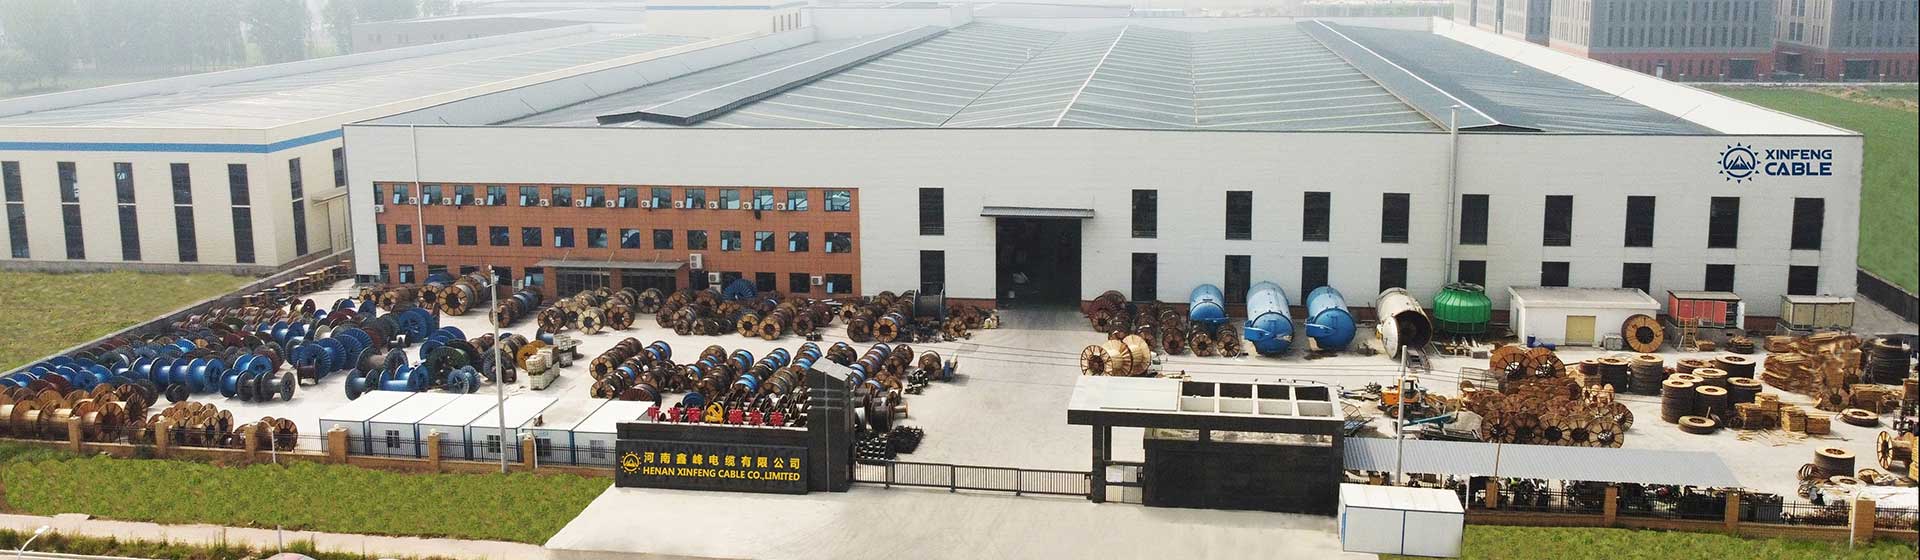 XINFENG-CABLE-FACTORY